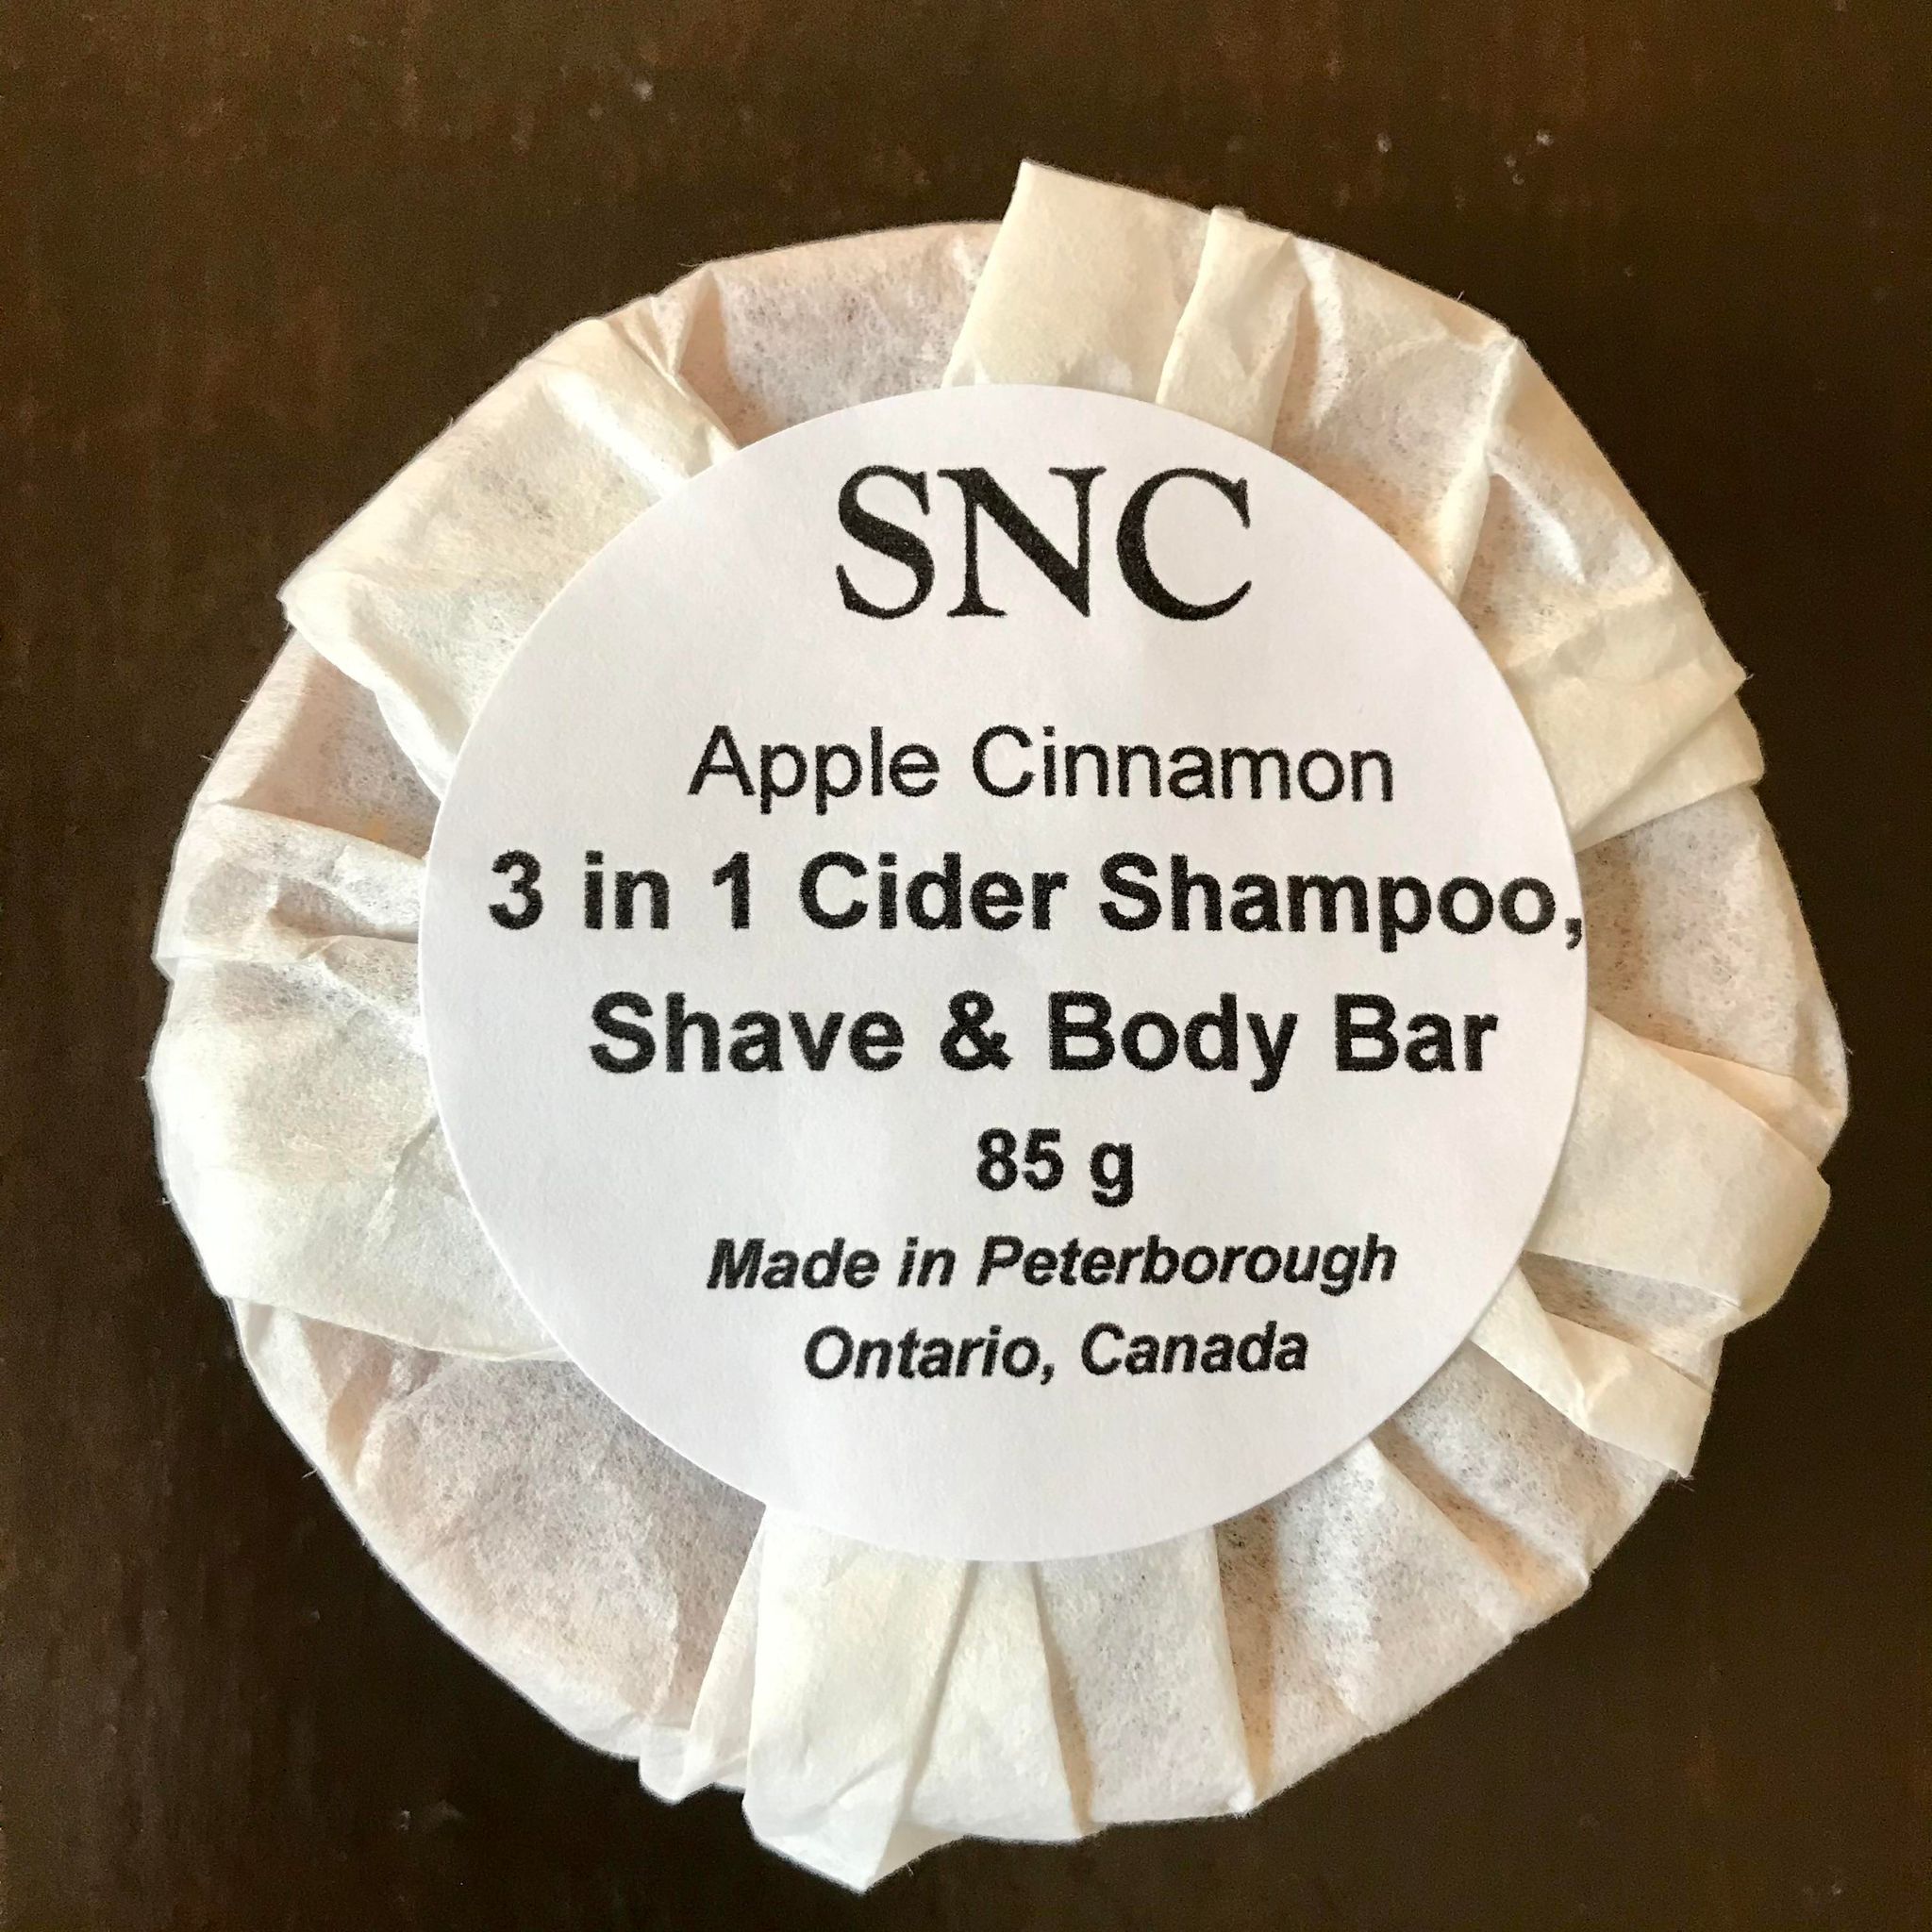 Round apple cinnamon essential oil scented cider shampoo shave  and body bar made in Canada by Simply Natural Canada